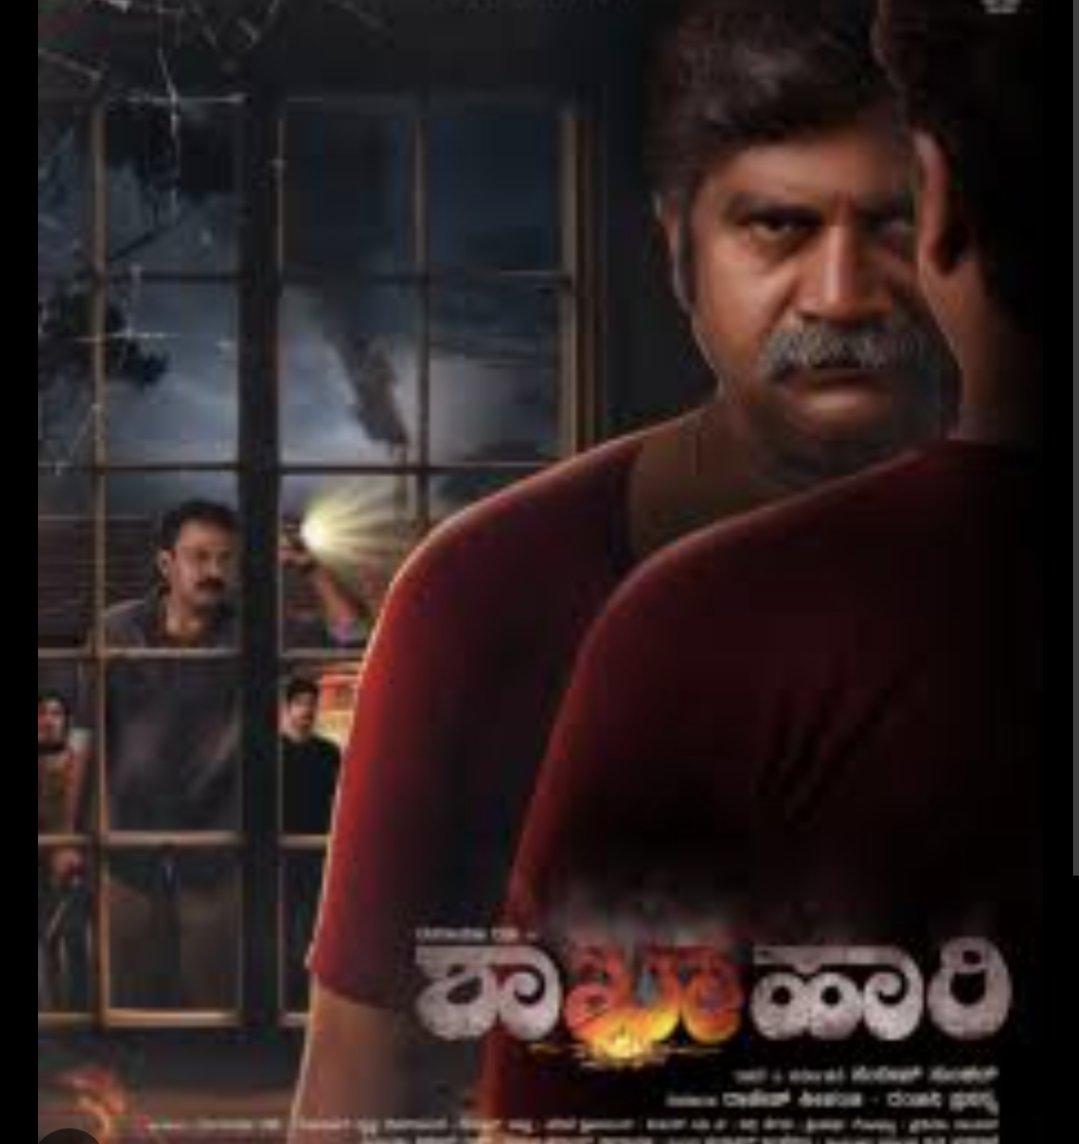 #Shakahari  a content oriented cinema. Those who compare every cinema with Malayalam cinema, please go and watch it in the theatre.#RangayanaRaghu and #GopalakrishnaDeshpande, woow.. A tremendous performance. ನಮ್ ಕನ್ನಡದಲ್ಲೂ ನಟರಾಕ್ಷಸರು ಇದ್ದಾರೆ saaar❤️ and you proved it.